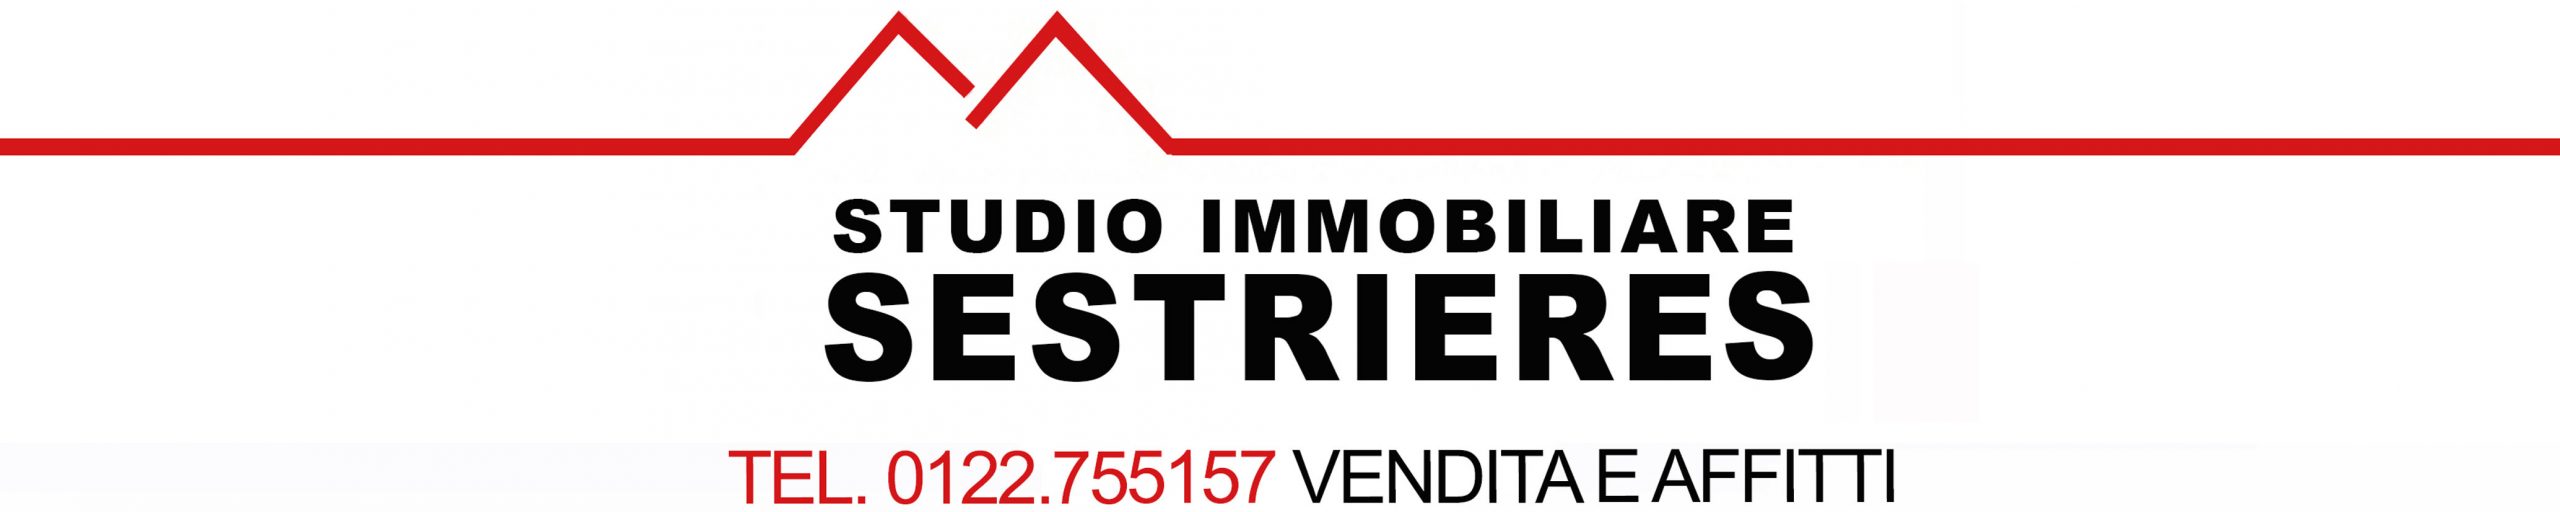 immobiliare sestrieres 1